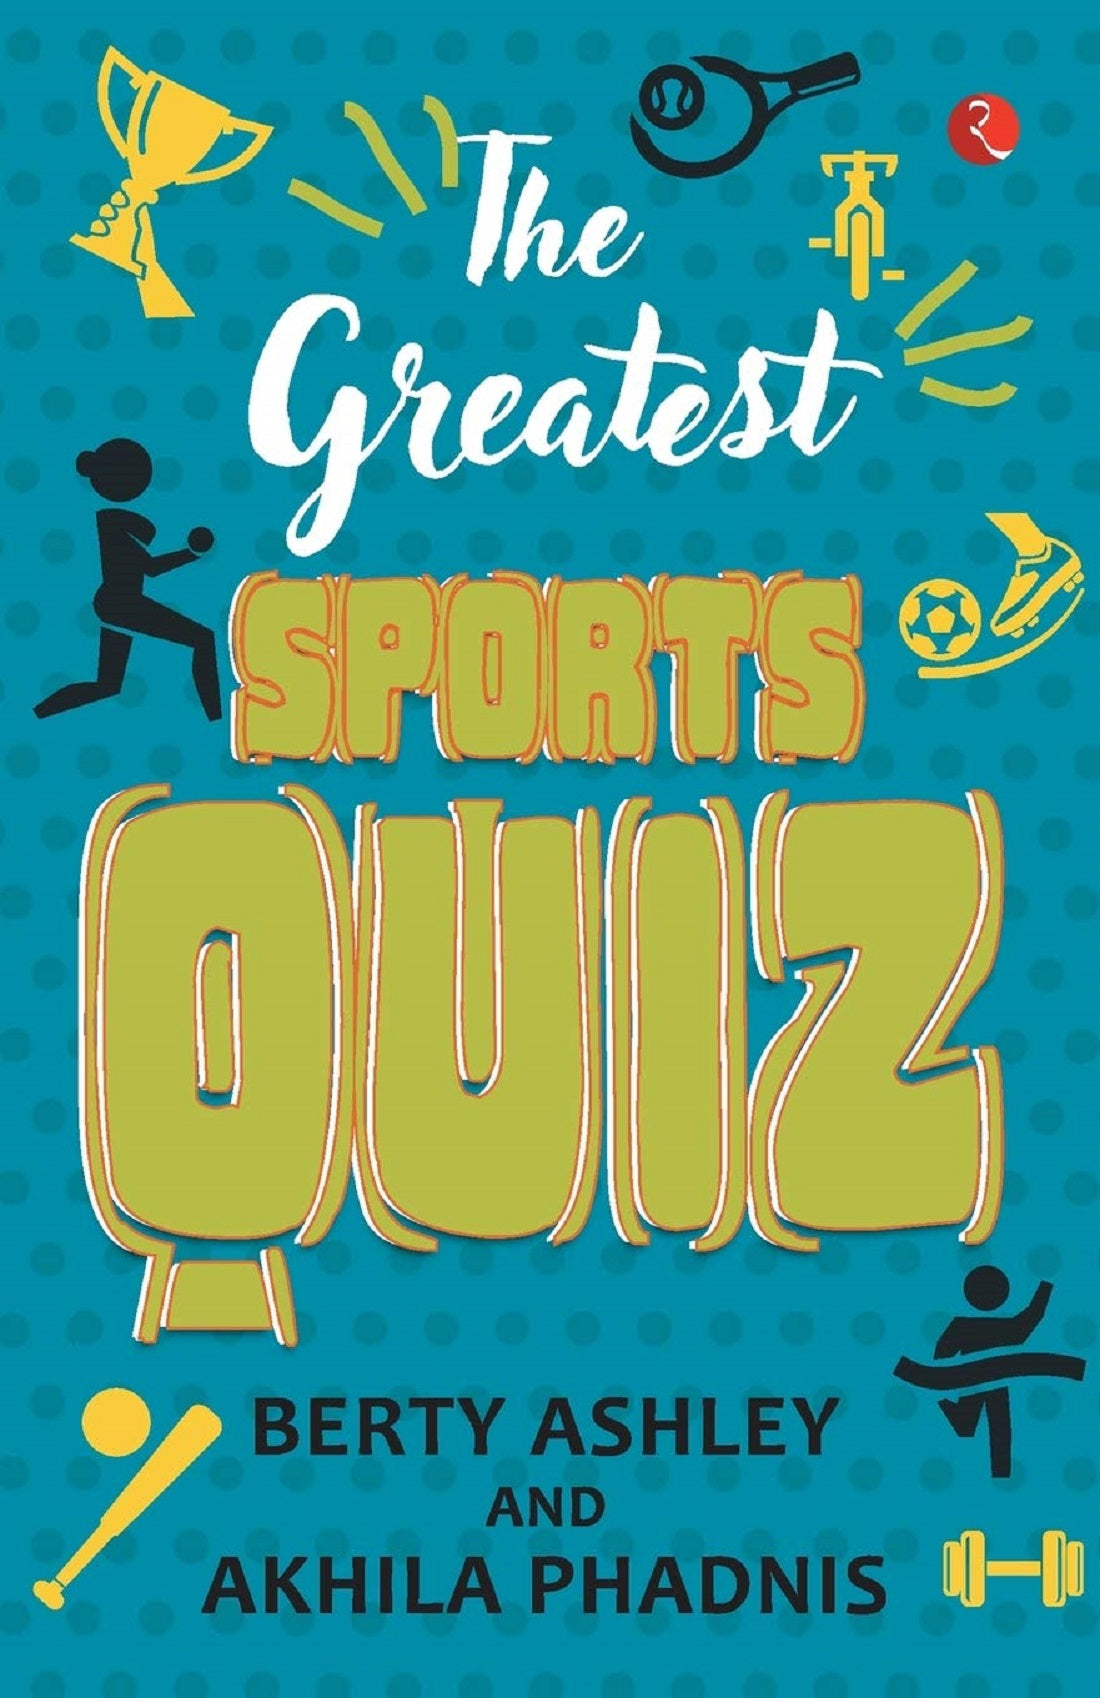 THE GREATEST SPORTS QUIZ